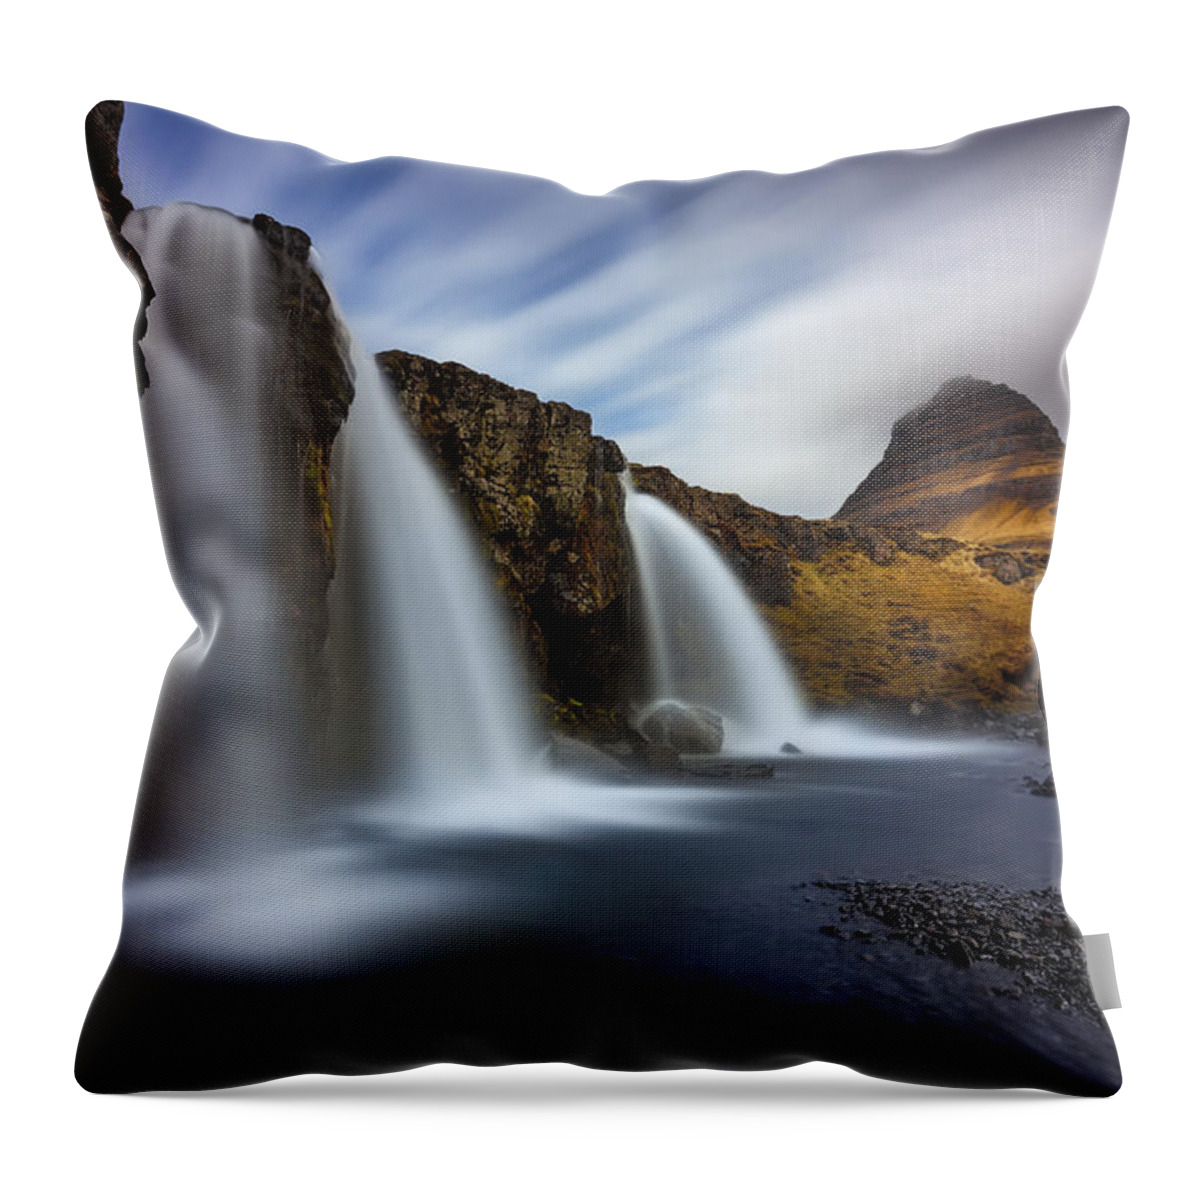 Iceland Throw Pillow featuring the photograph Radiance by Dominique Dubied